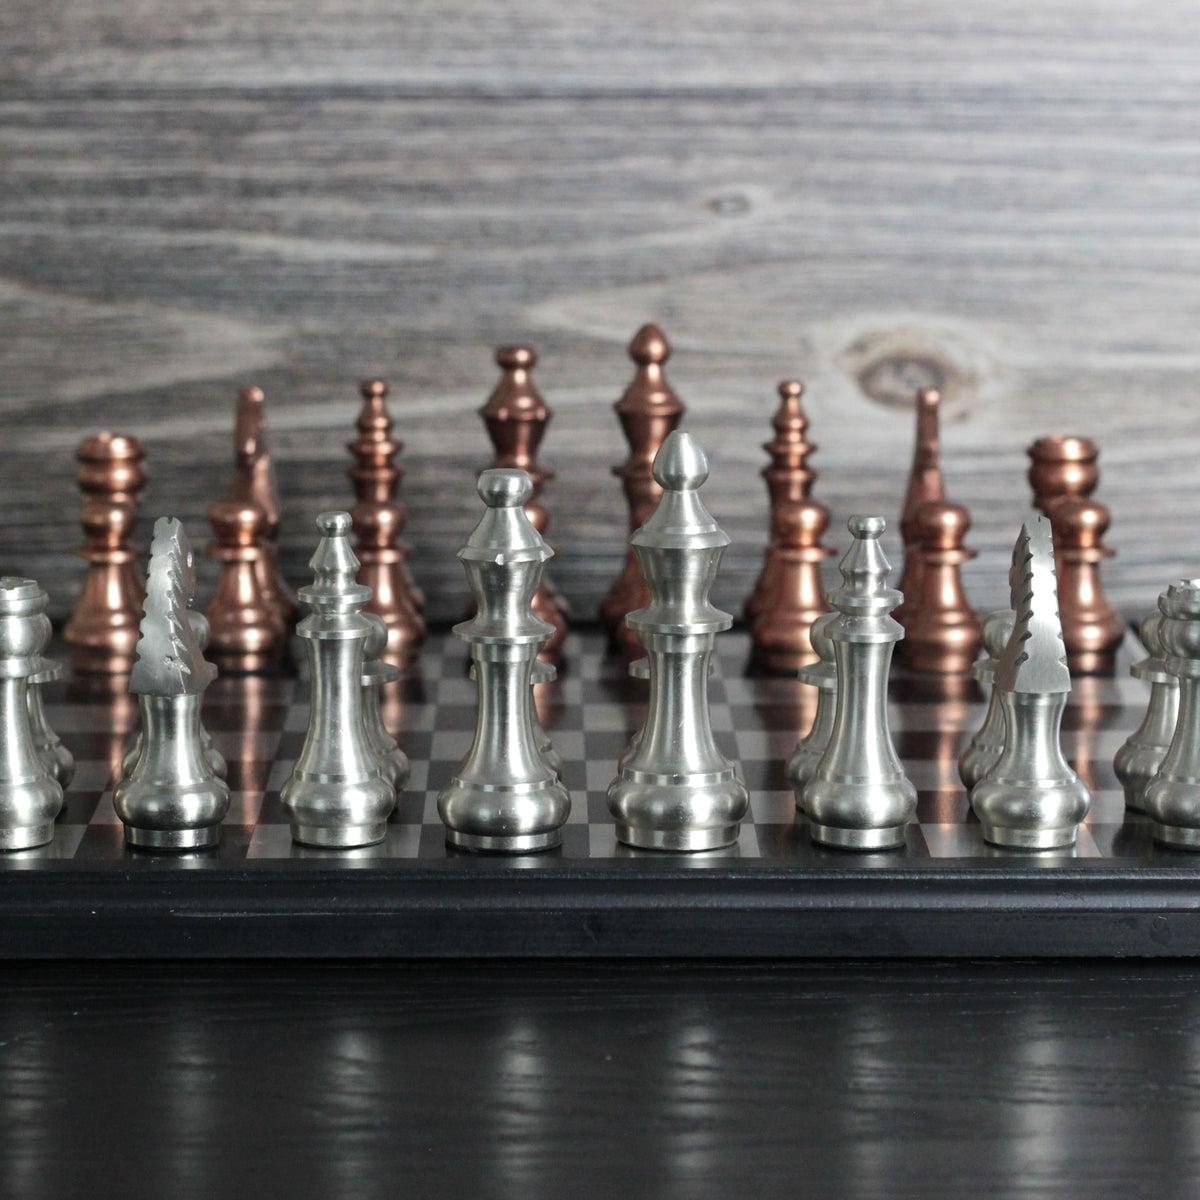 The Sicilian Storm - Rustic Metallic Chess Board and Pieces - Marble Cultures